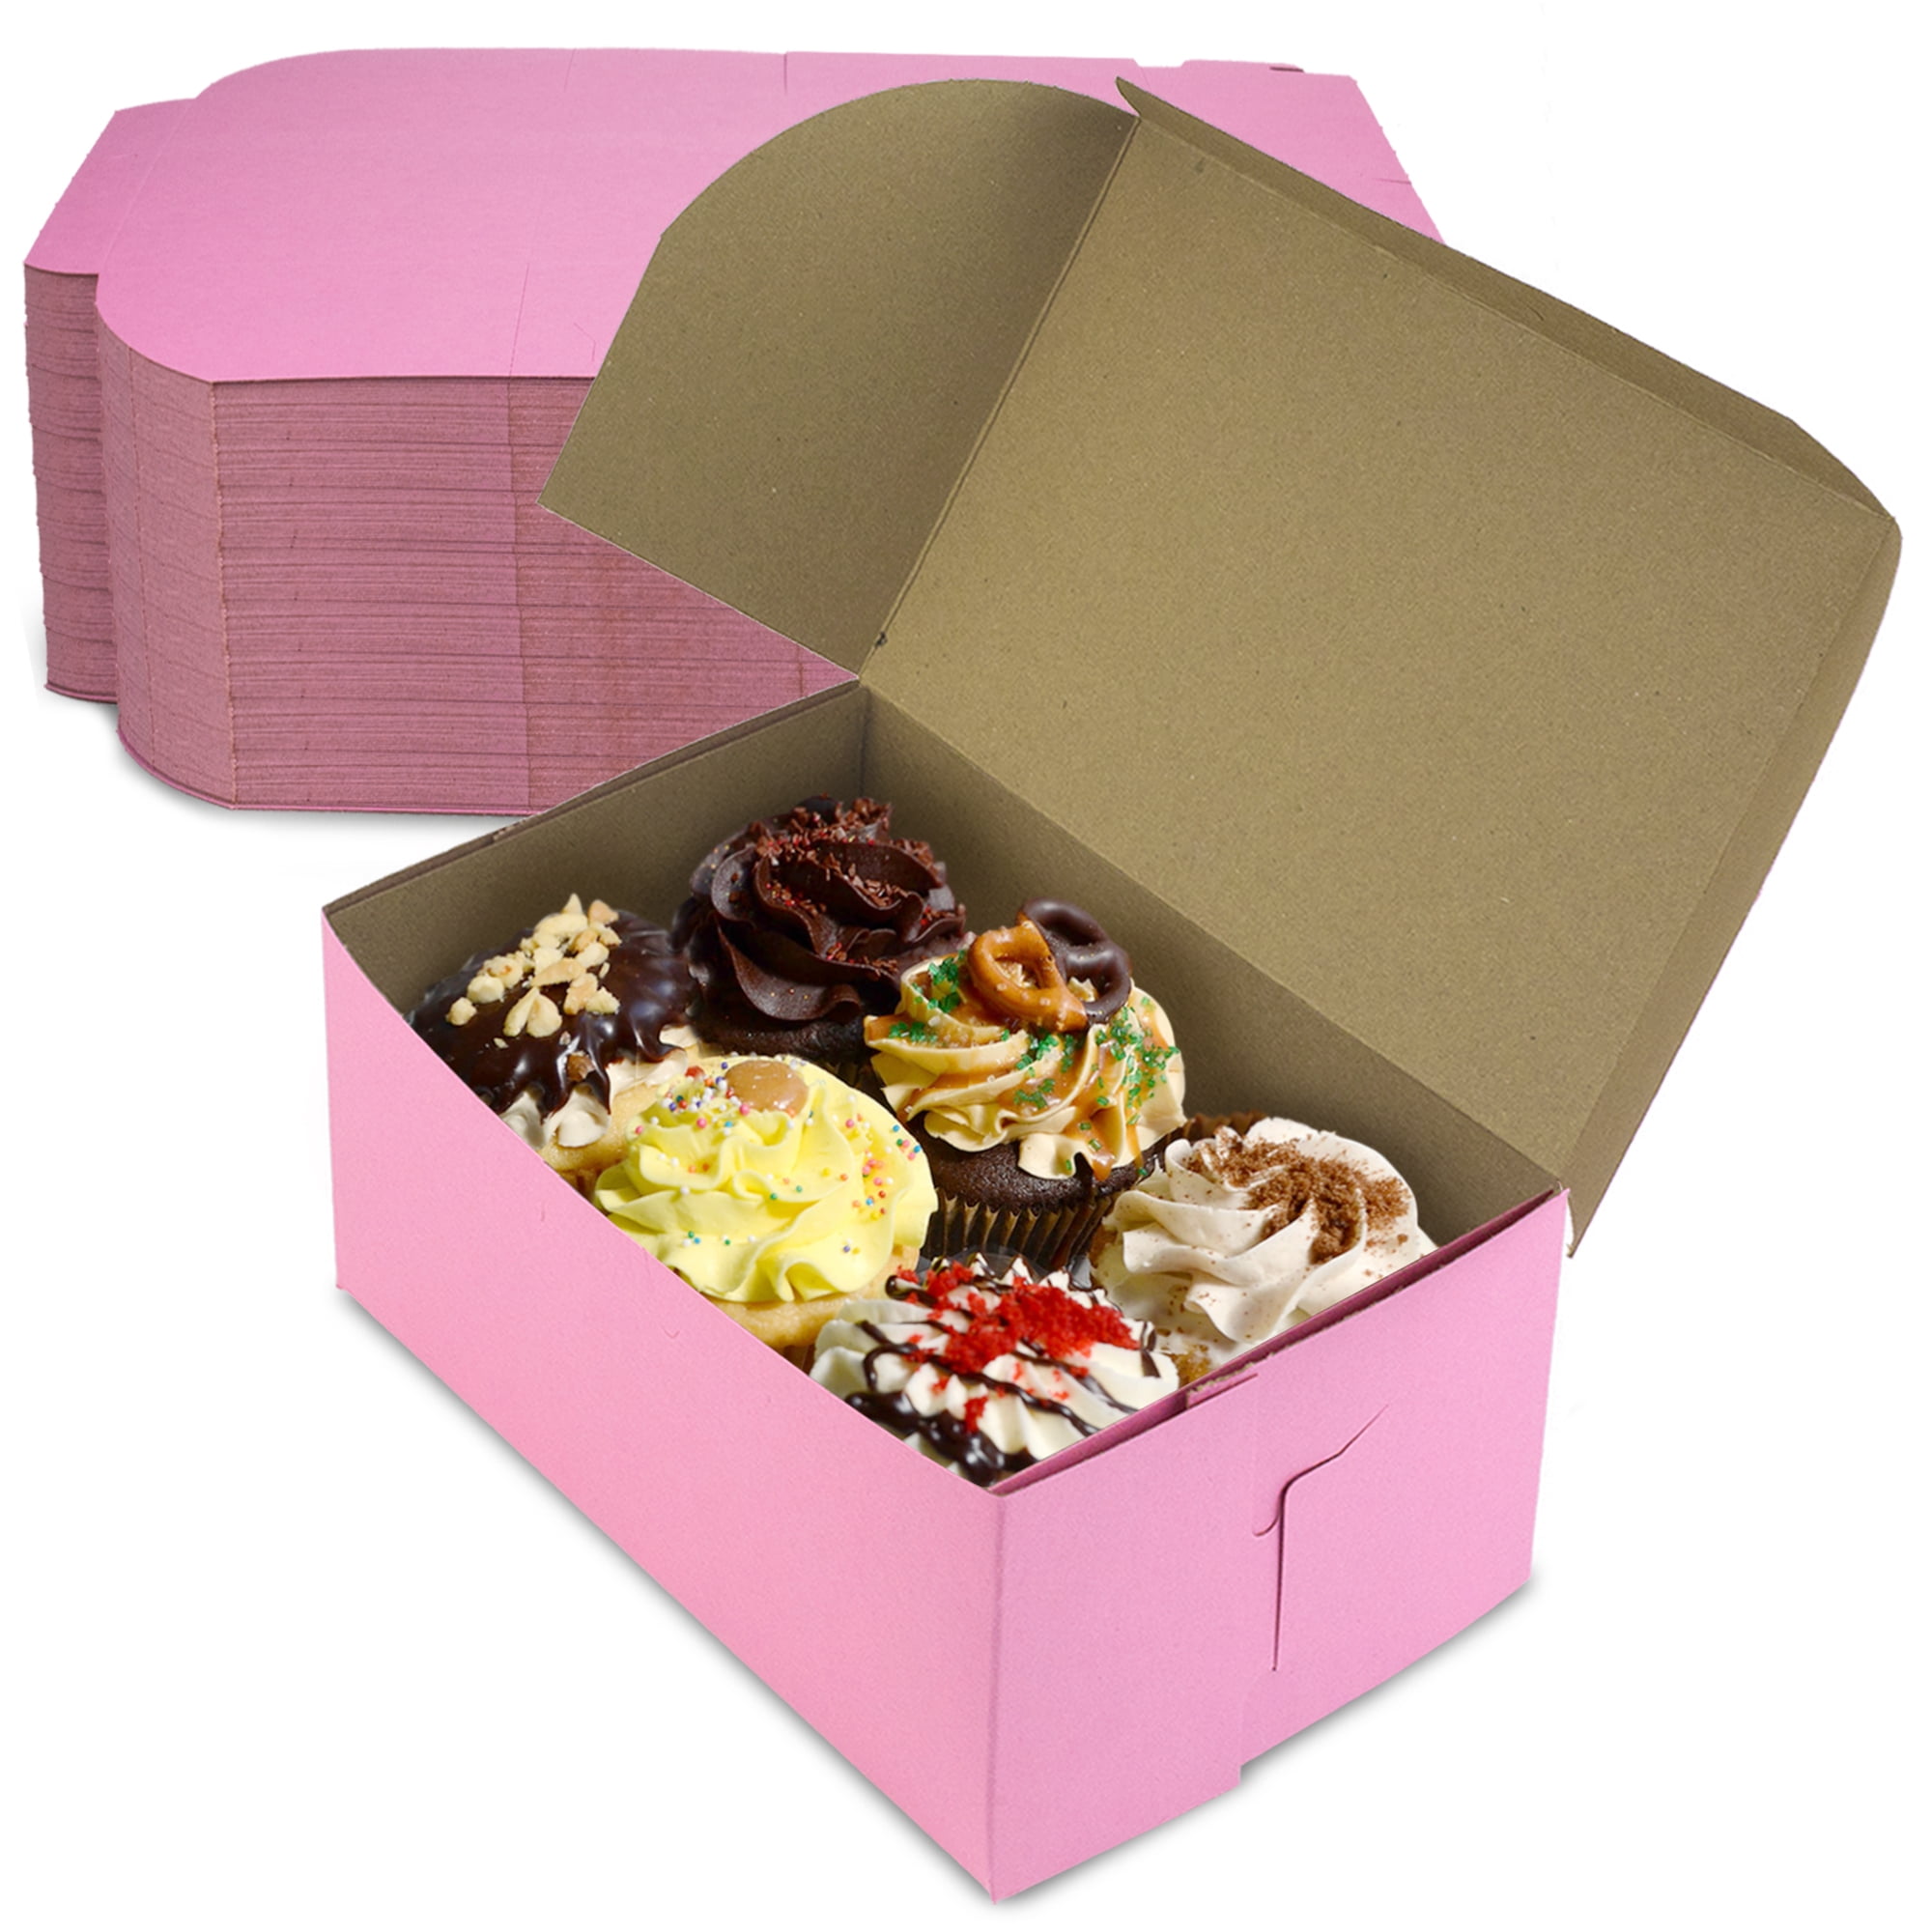 10-Pack Bakery Box 10" x 10" x 4" Pink Square Paperboard Cake 